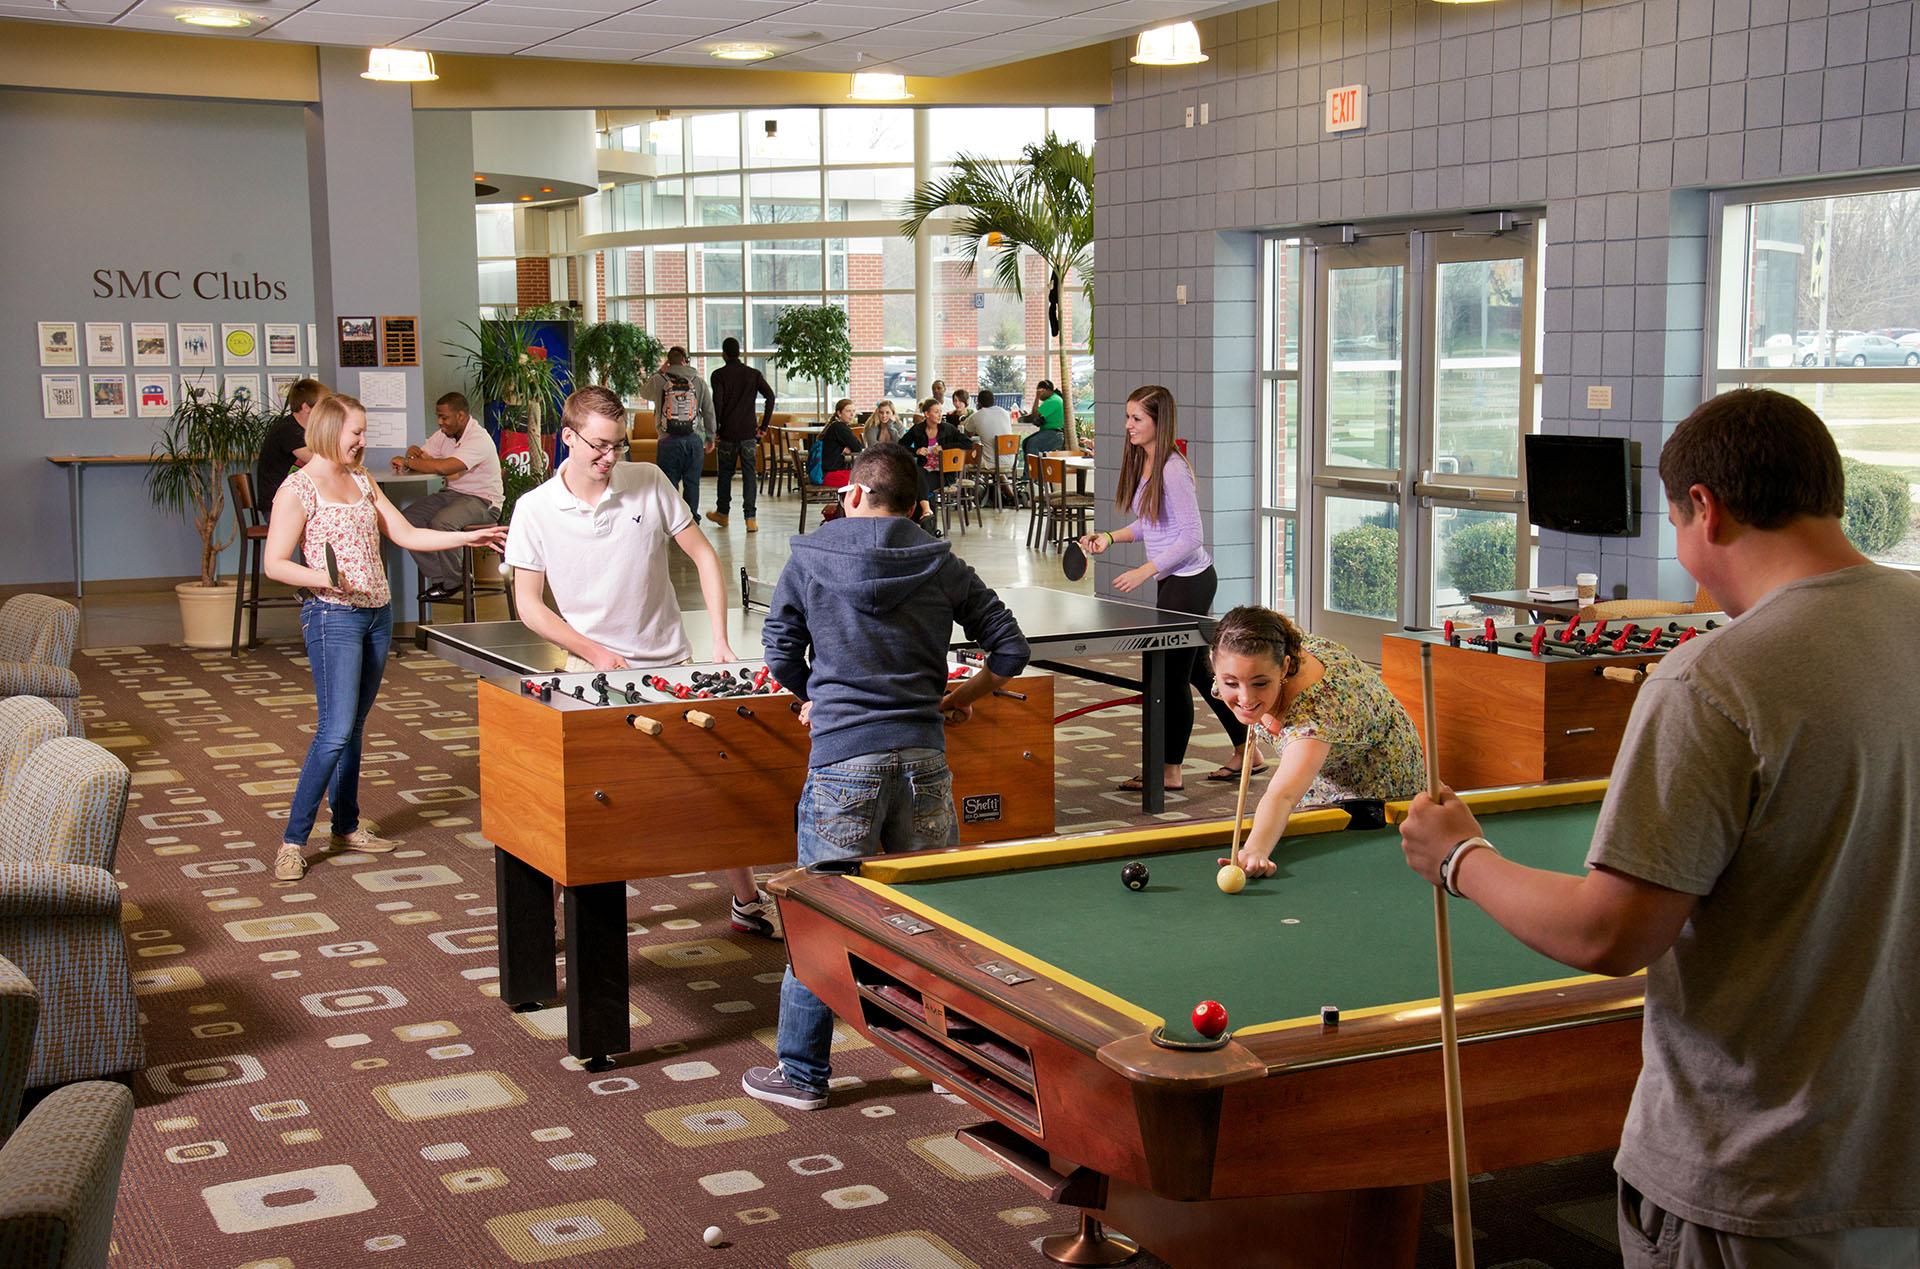 The game room in the SAC